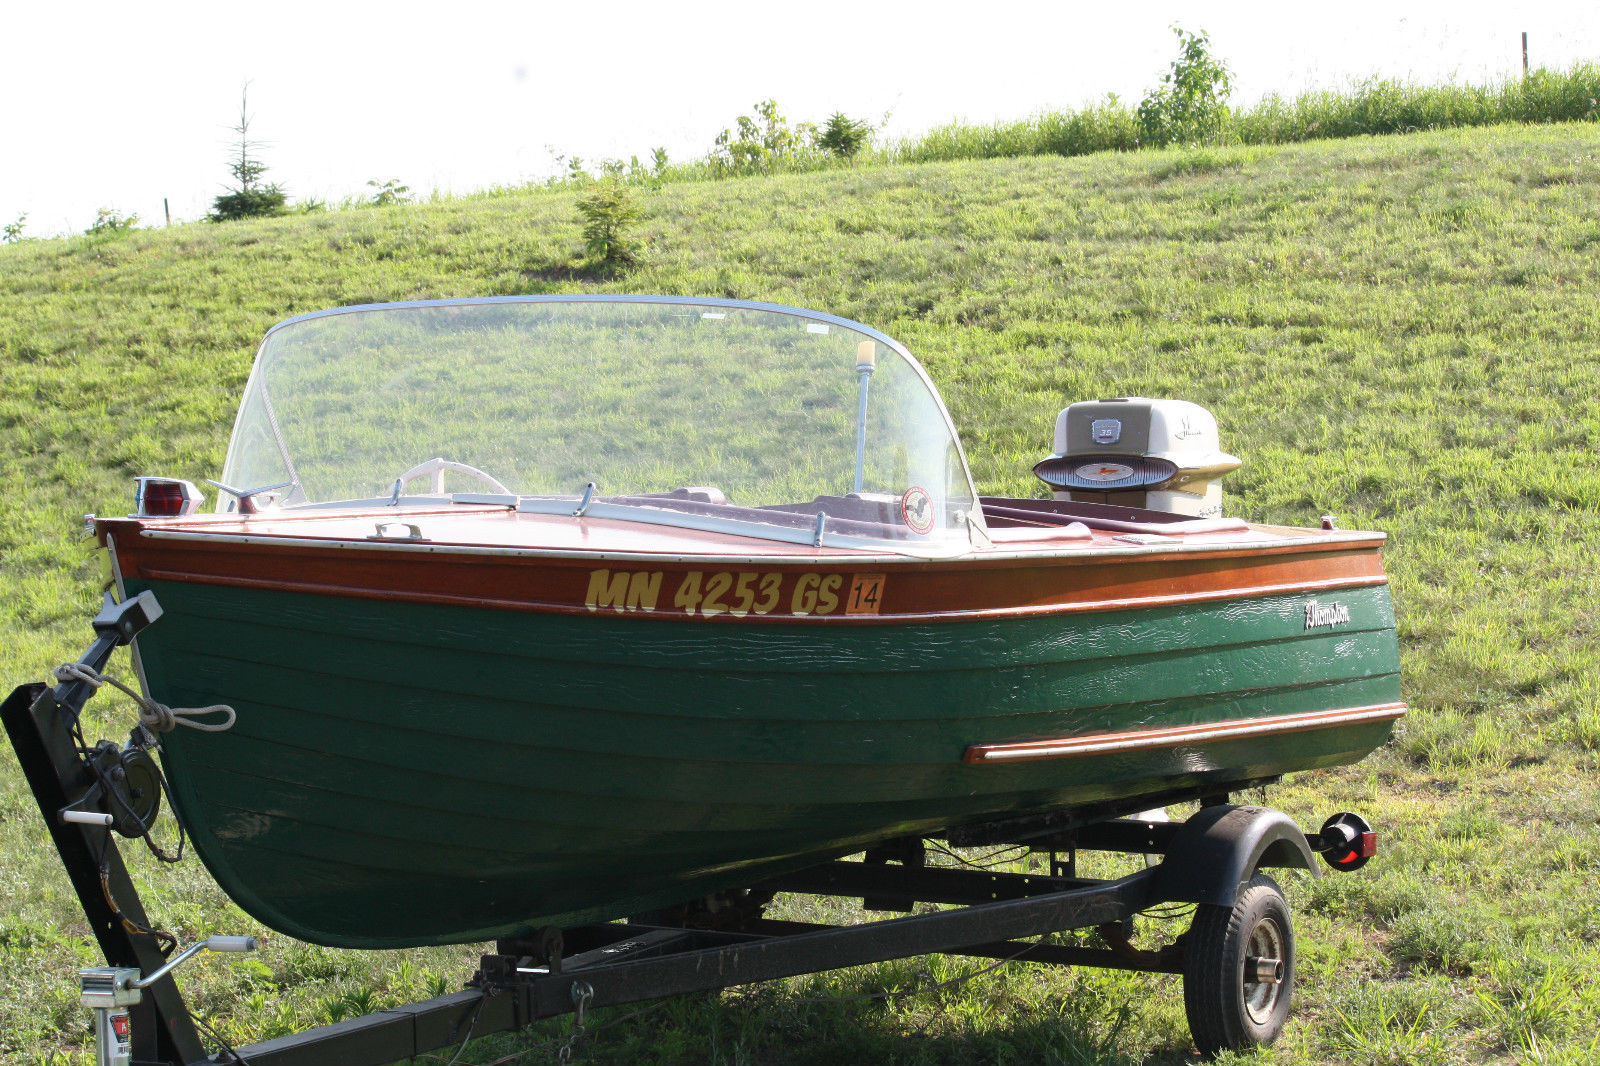 Thompson Boat Works Baby Sea Skiff 1958 for sale for 